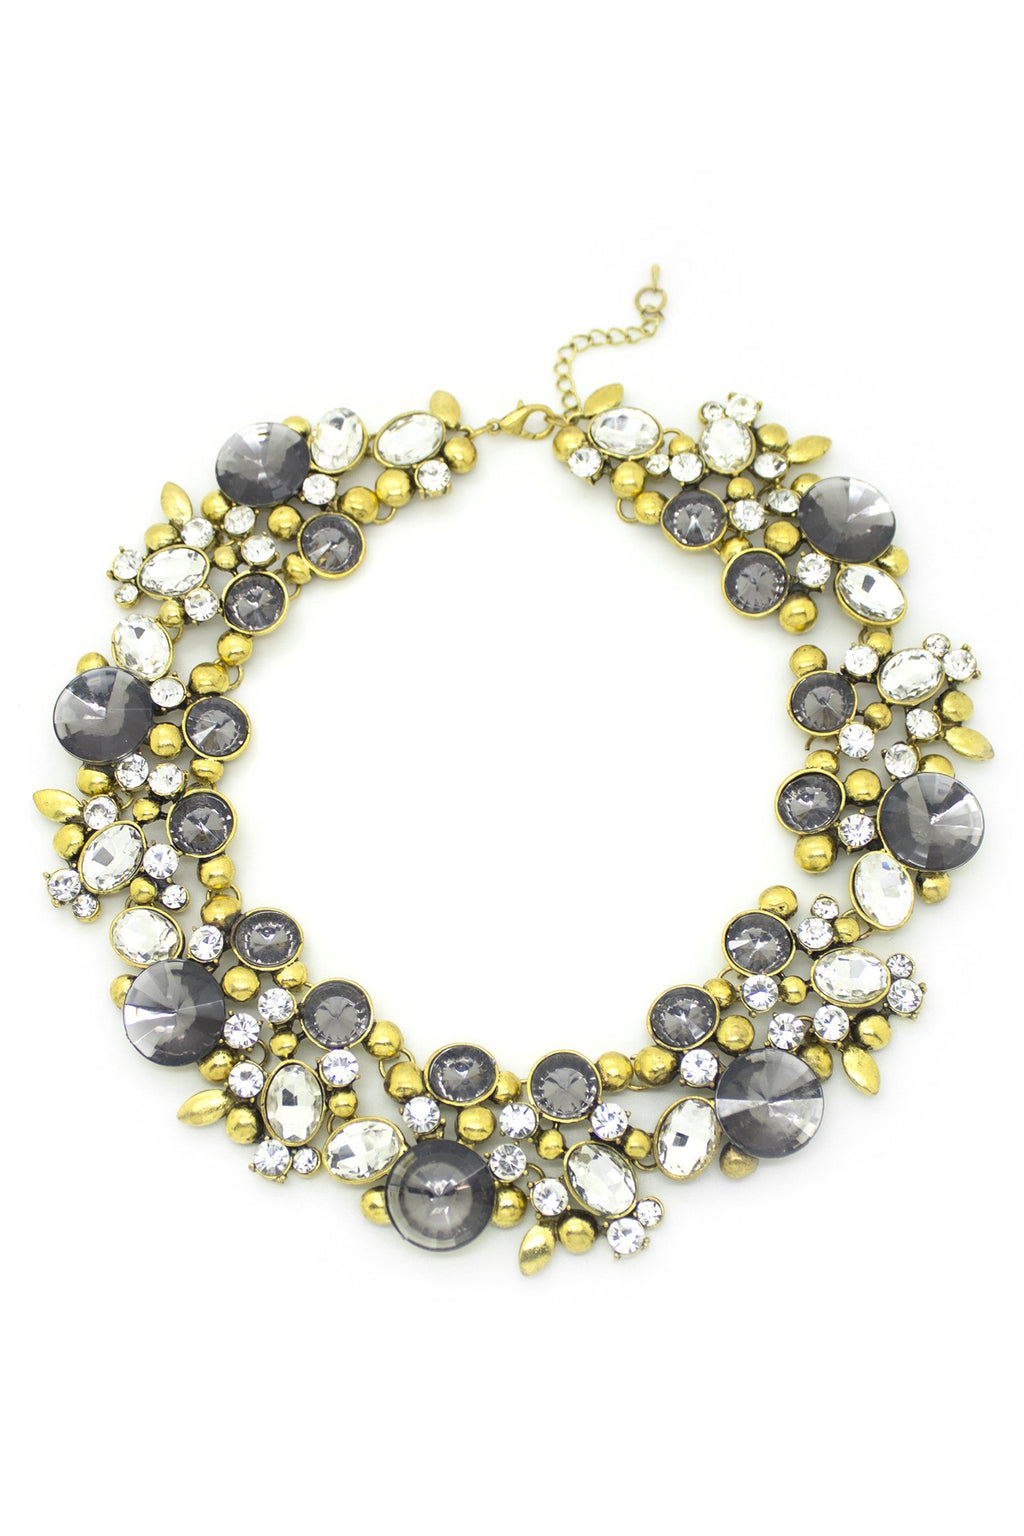 Large statement necklace with grey and white glass circle beads.